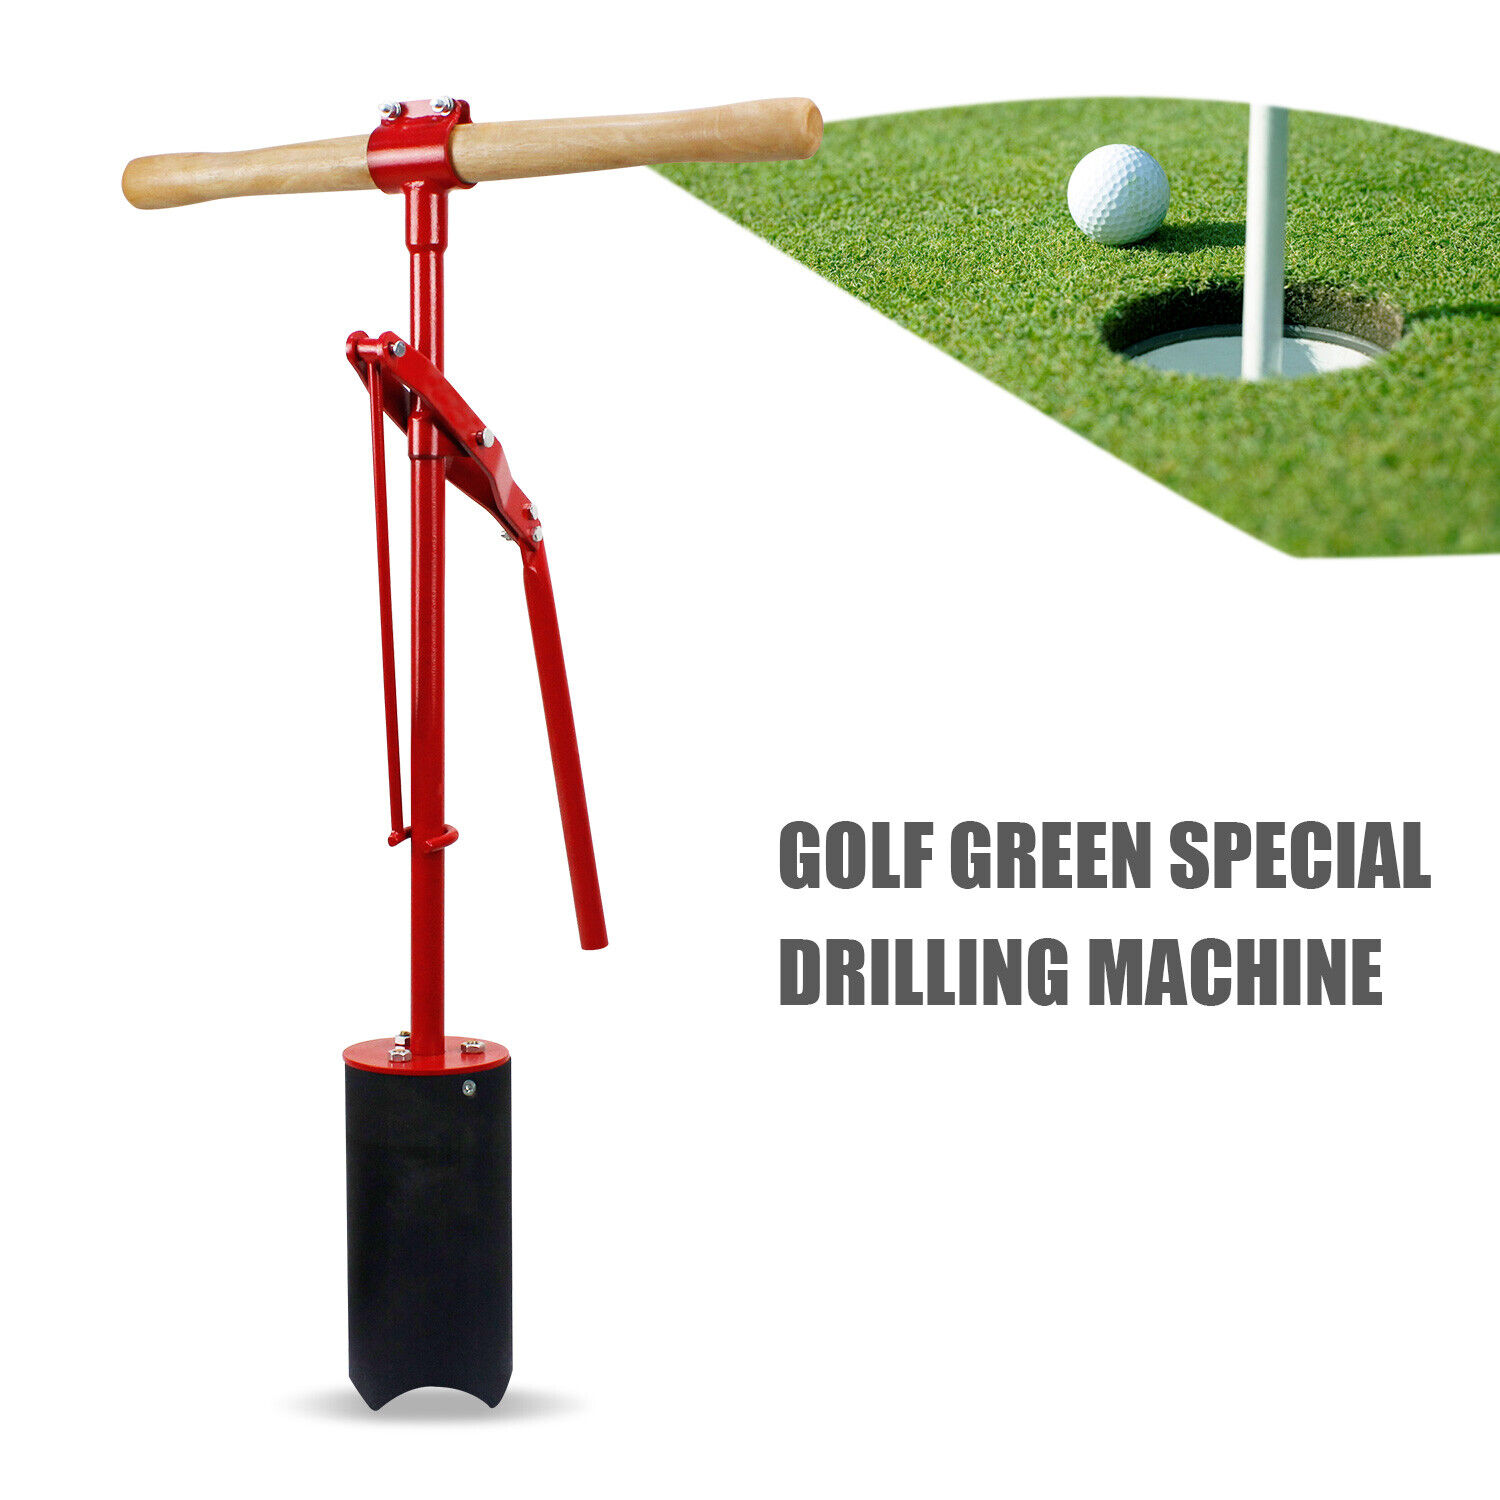 Putting Green Lever Action Hole Cutters Punch Machine Golf Green Special Drillin